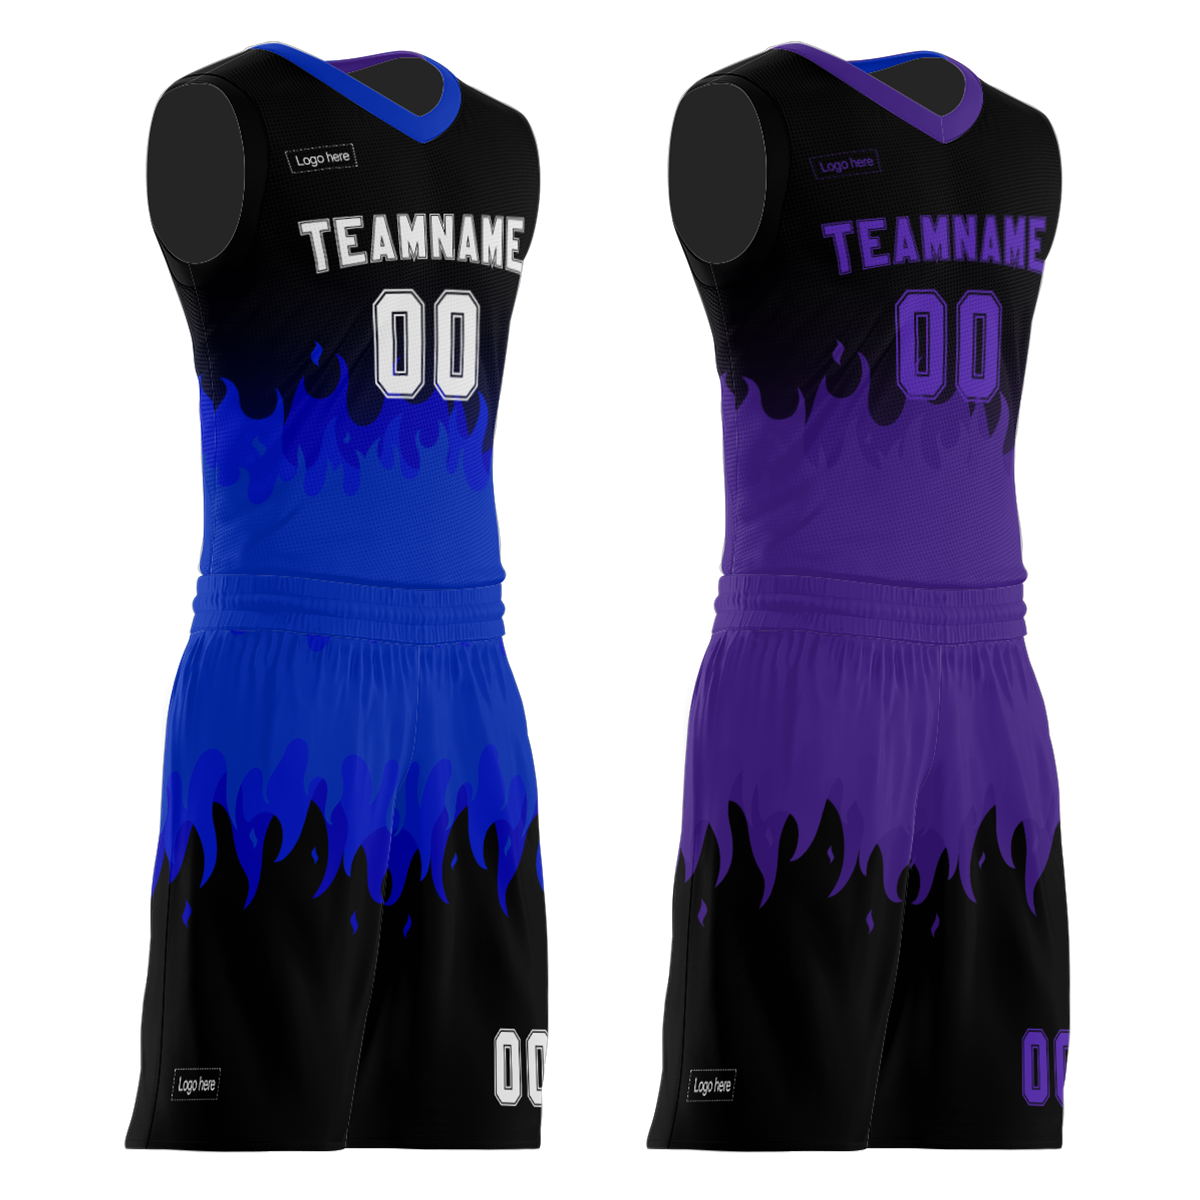 Wholesales Reversible Basketball Jersey Custom Personalized Print Your Name Number Basketball Team Uniform Shirts for Adult